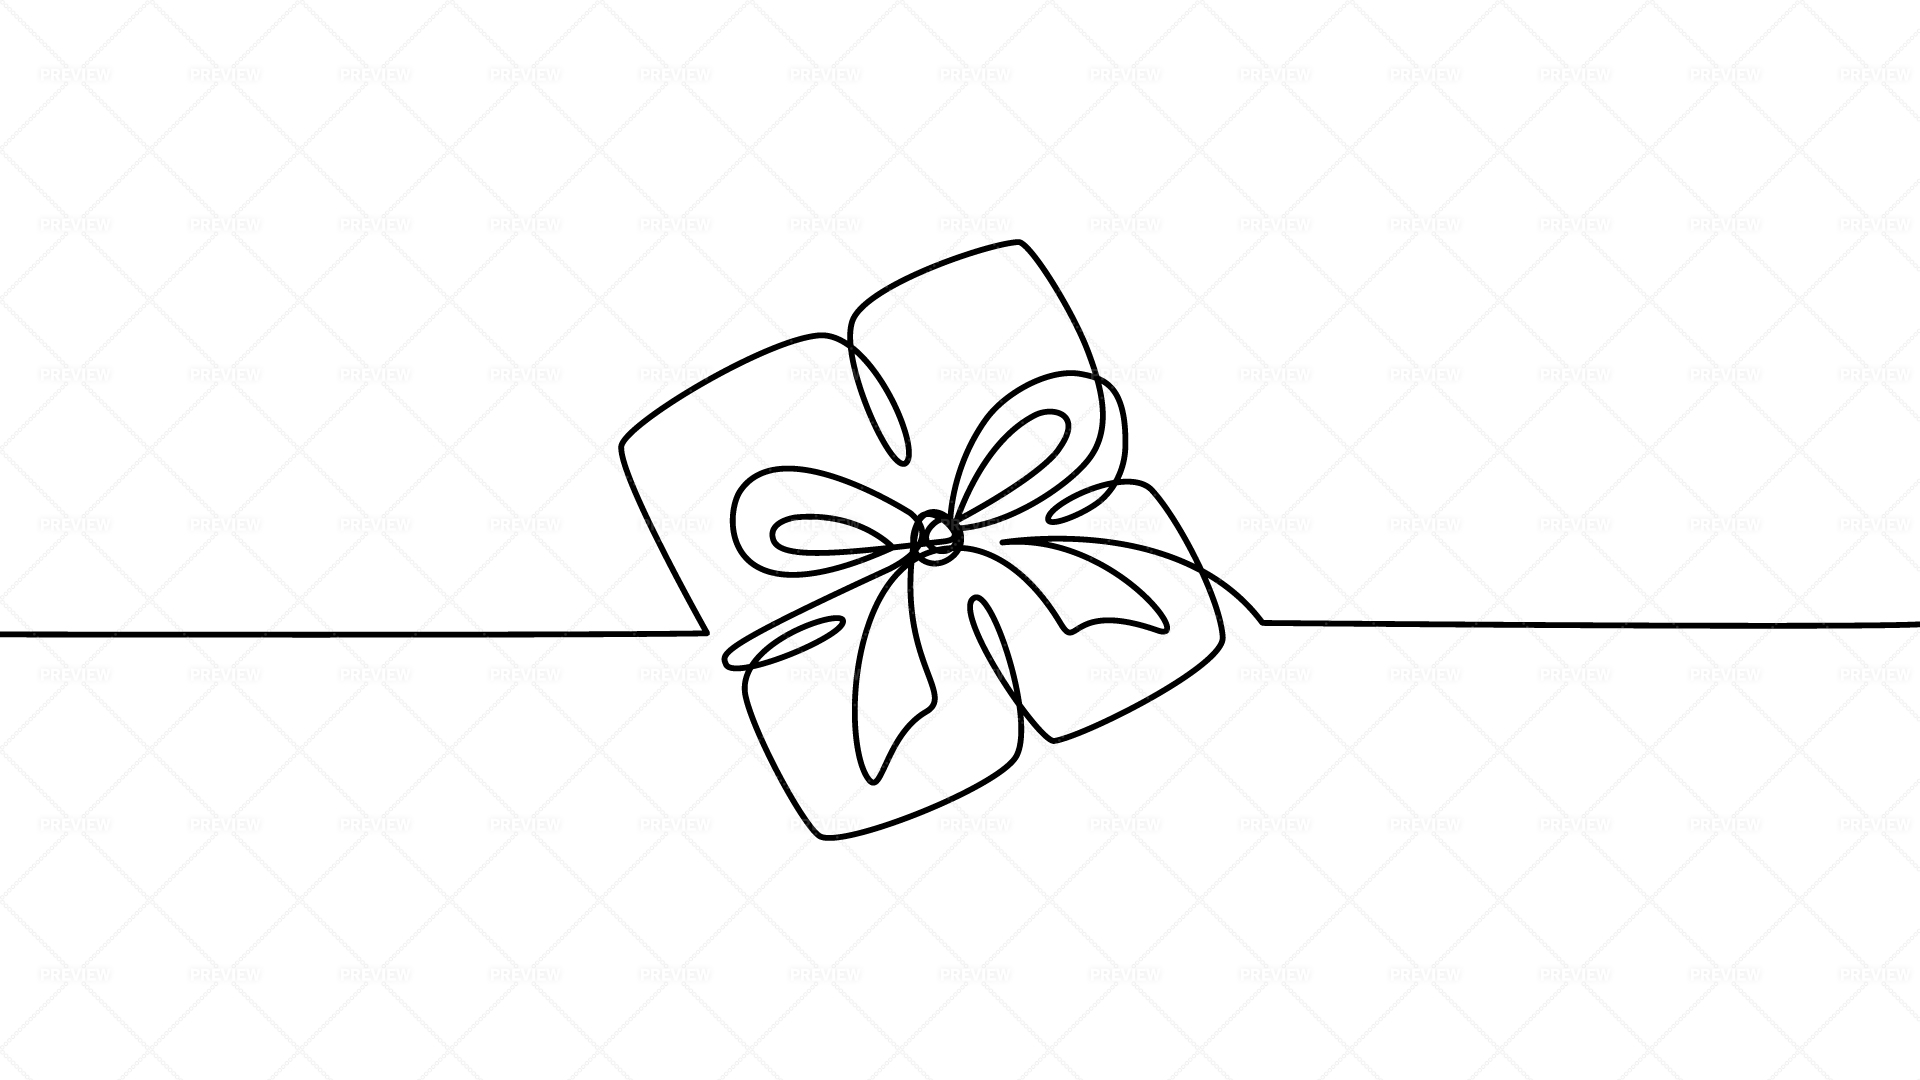 Continuous Line Drawing of Gift Box Vector Illustration Stock Vector -  Illustration of holiday, outline: 152585755, Drawing Gifts -  valleyresorts.co.uk